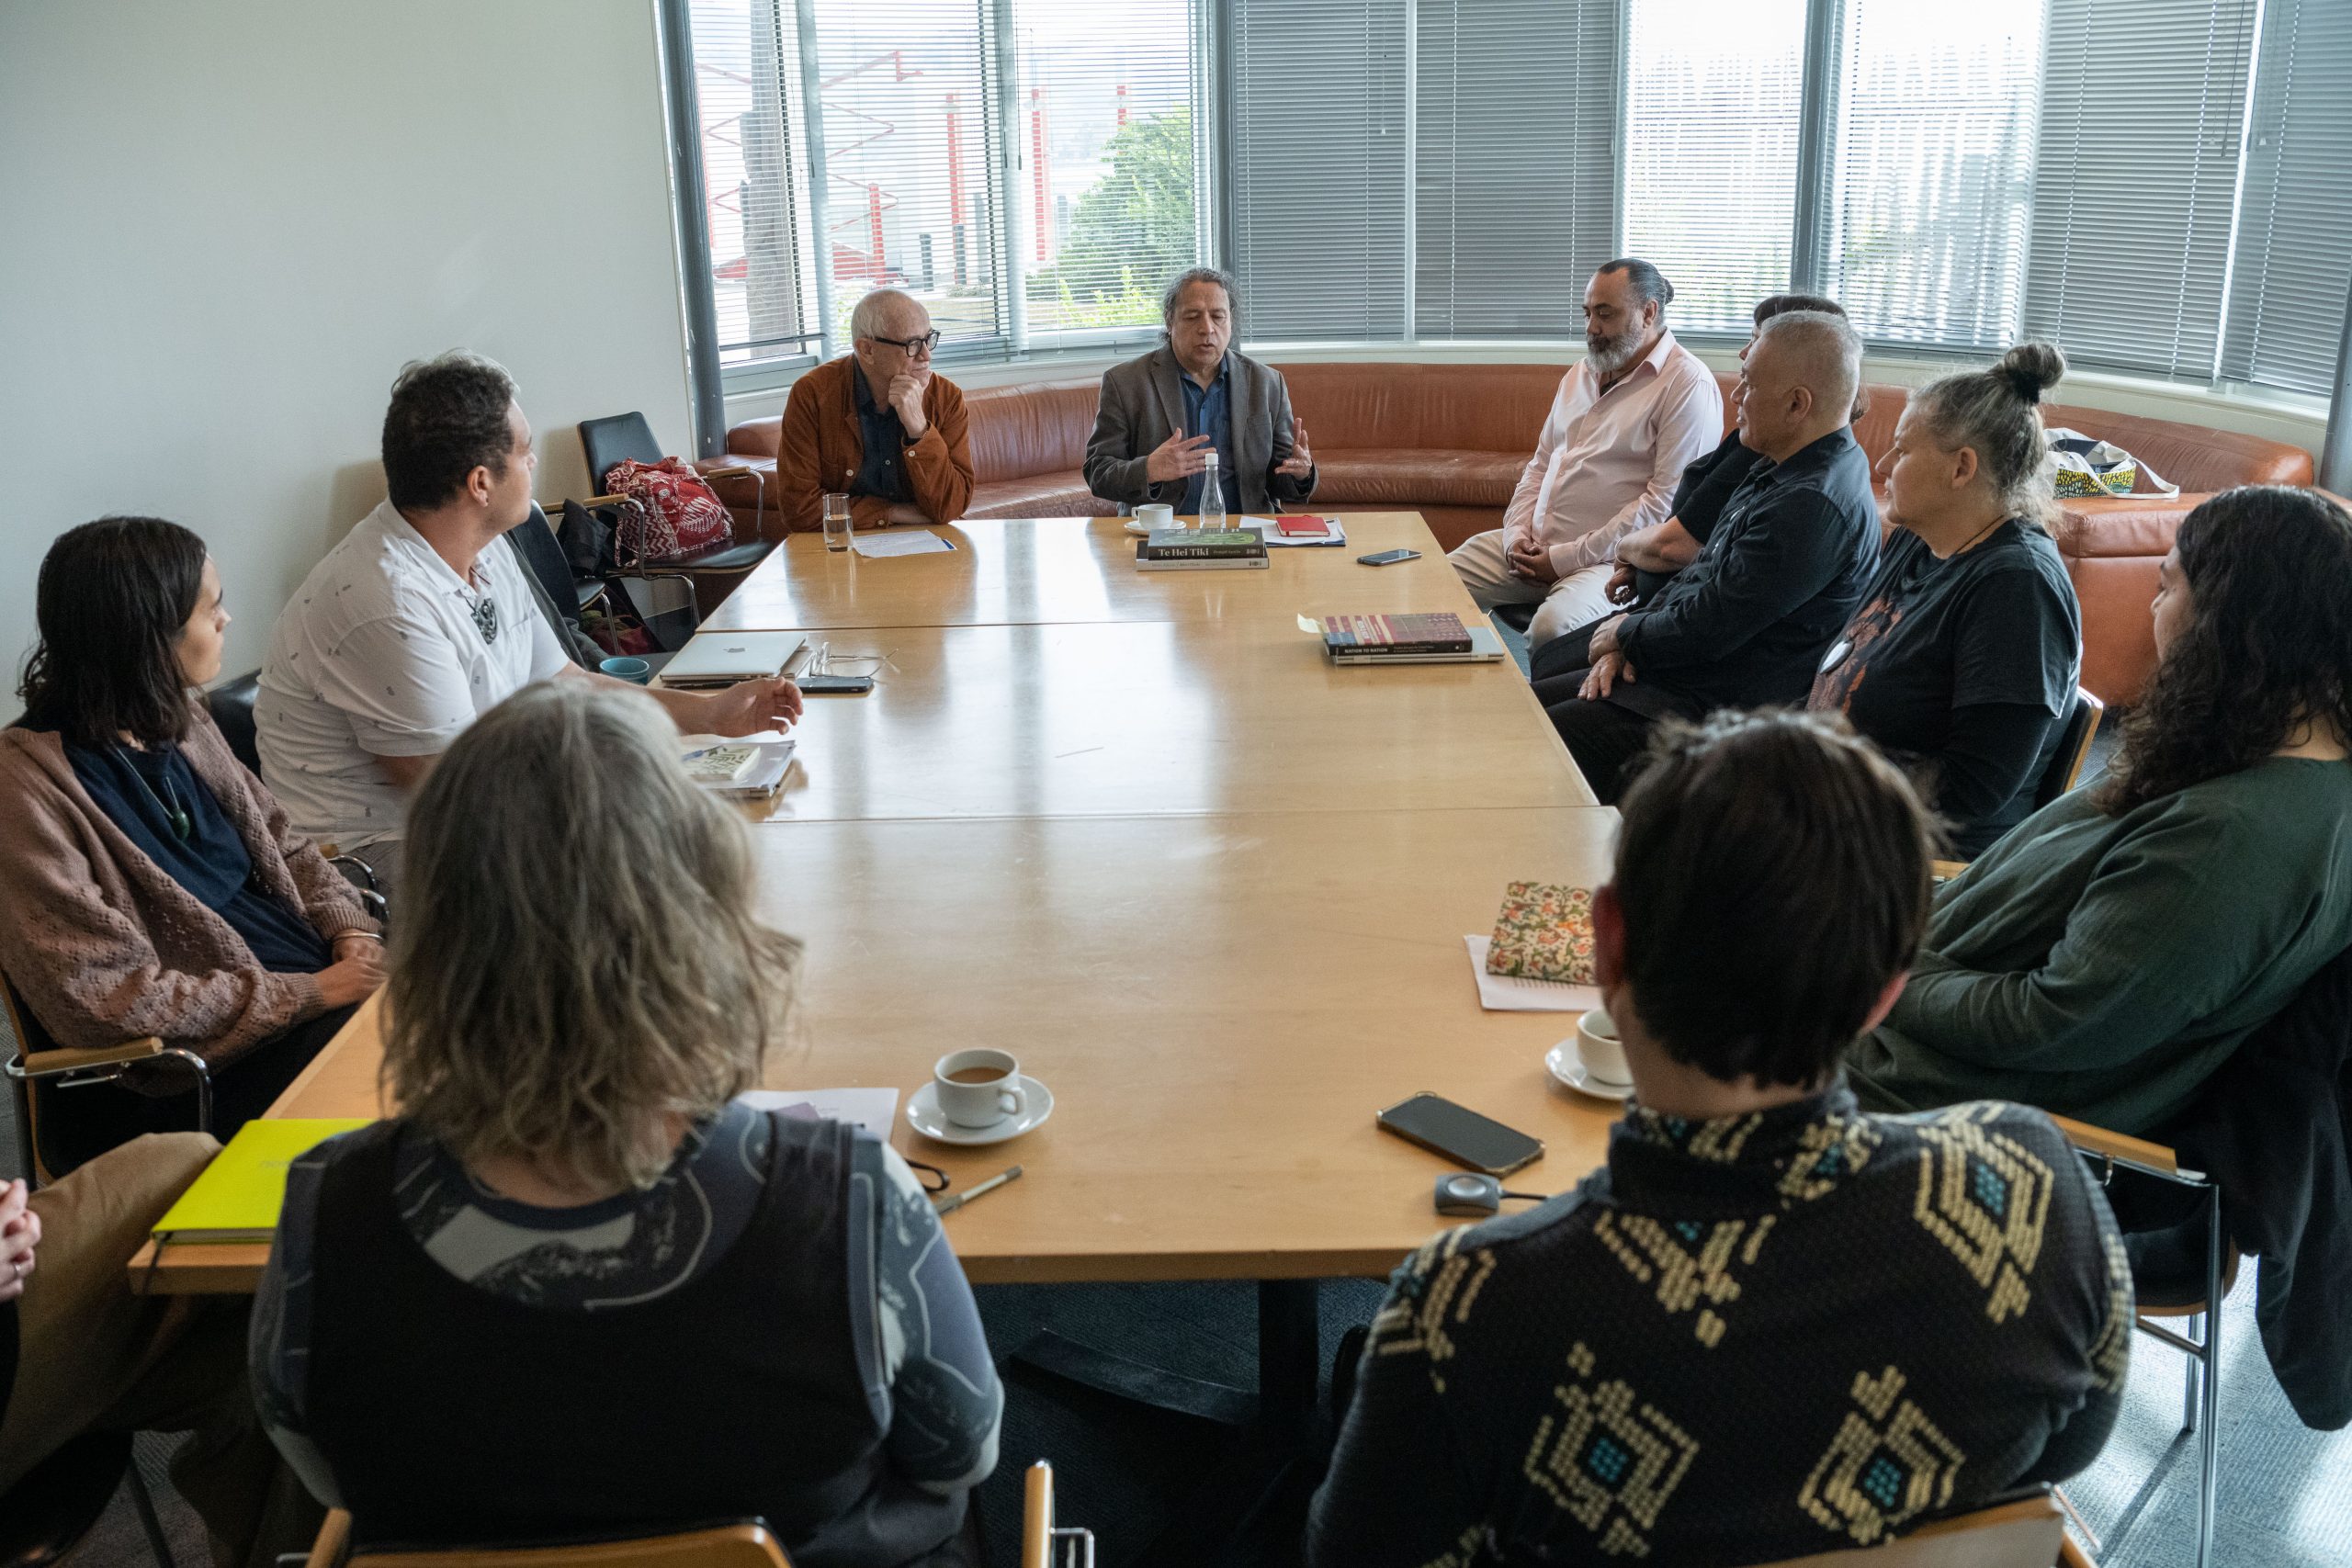 The next day, Smith participated in a roundtable discussion at Te Pap with a number of local curators and PhD students from Victoria University of Wellington.